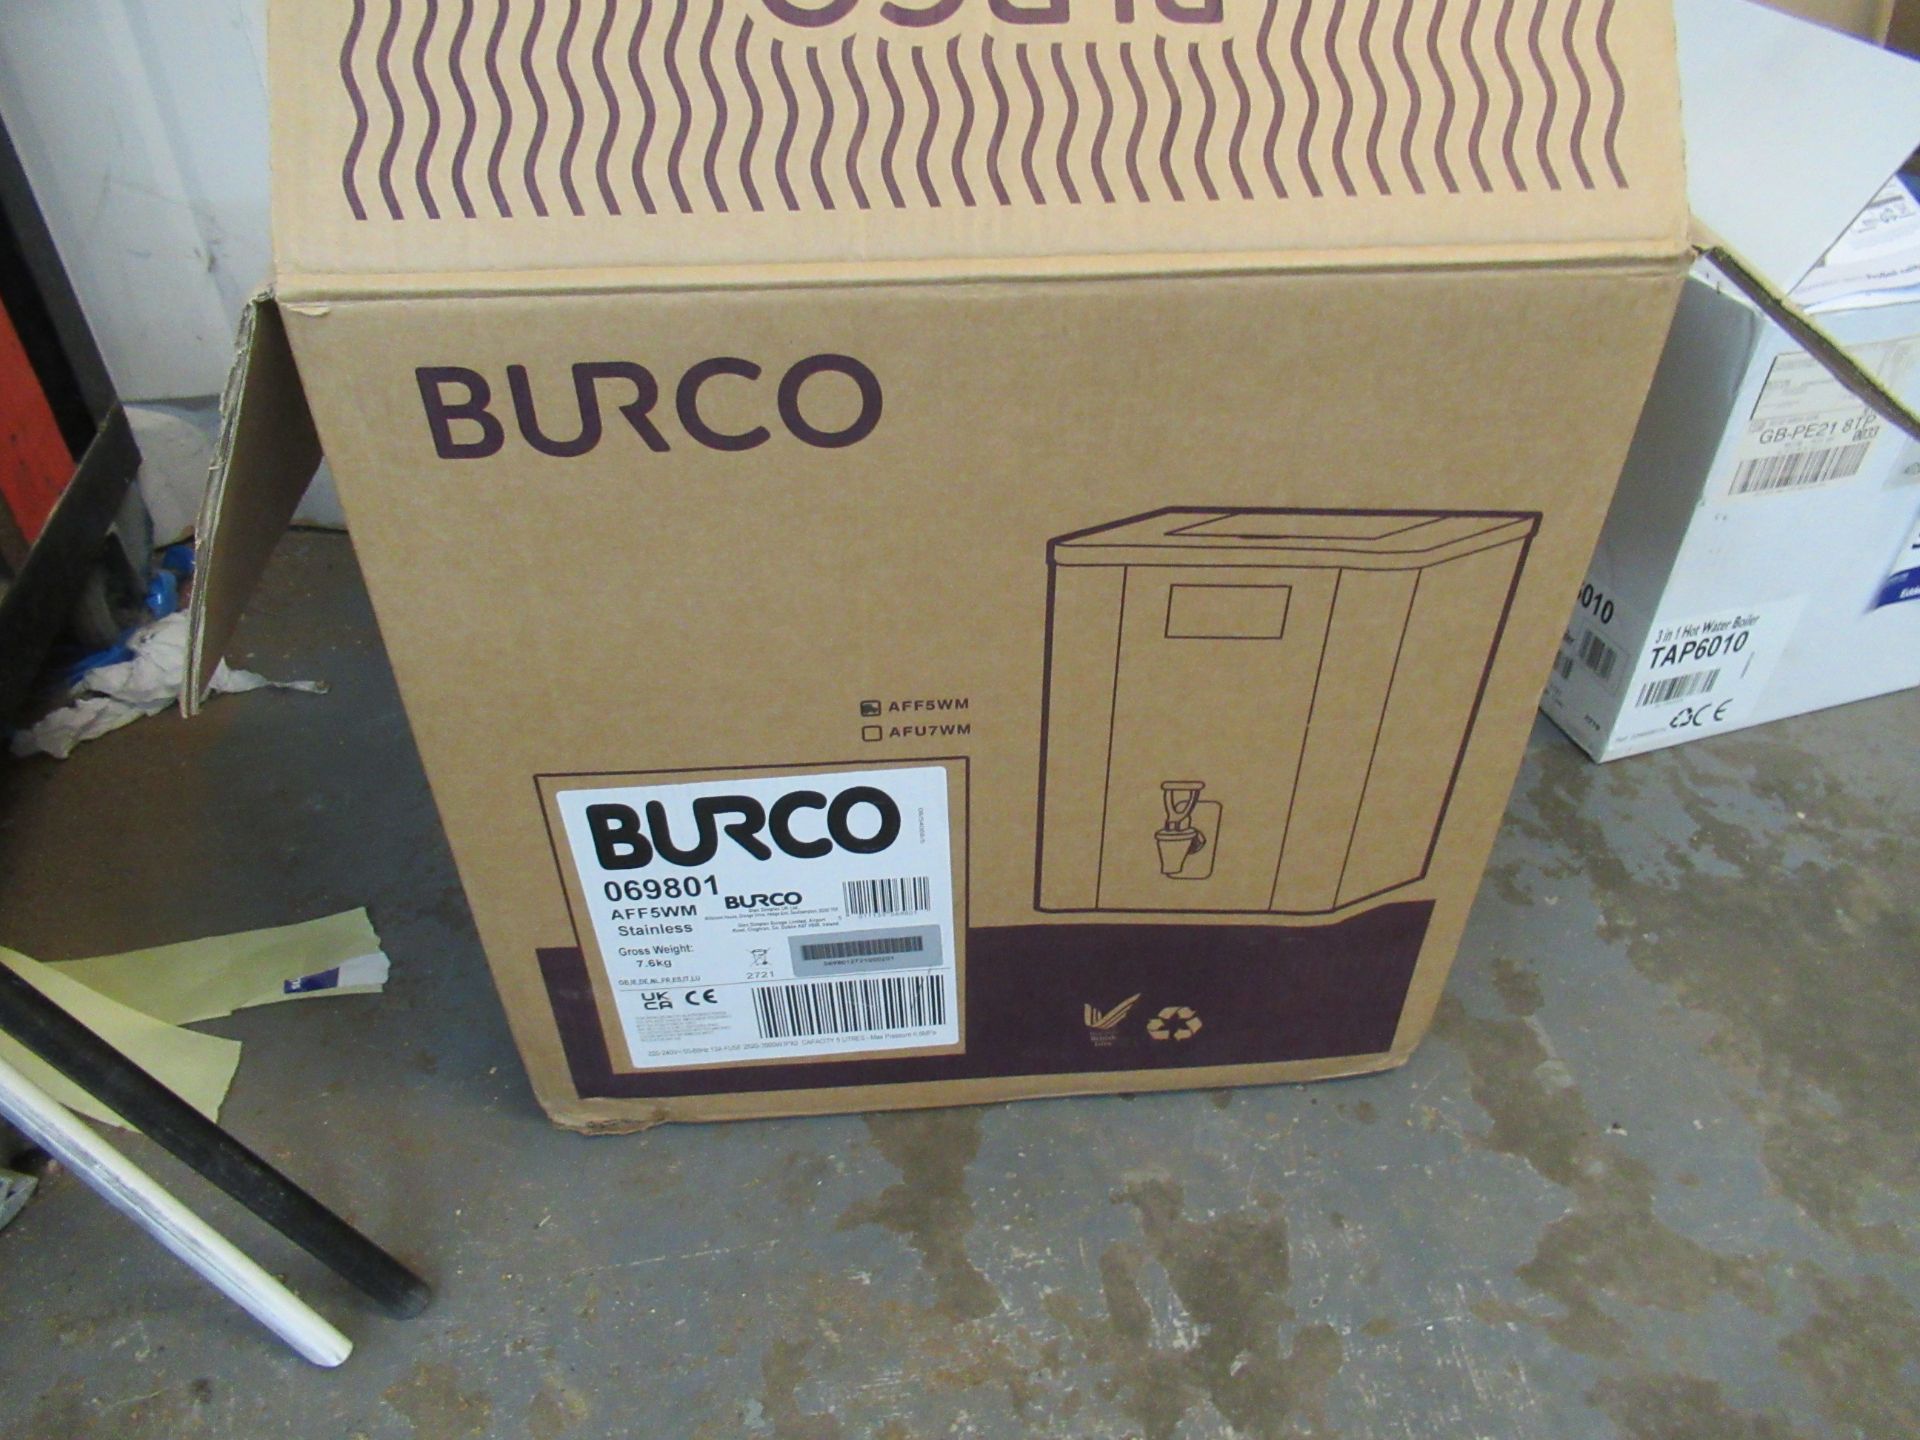 Burco AFF SWM Stainless Hot Water Boiler/Dispenser (boxed/unused) - Image 2 of 2